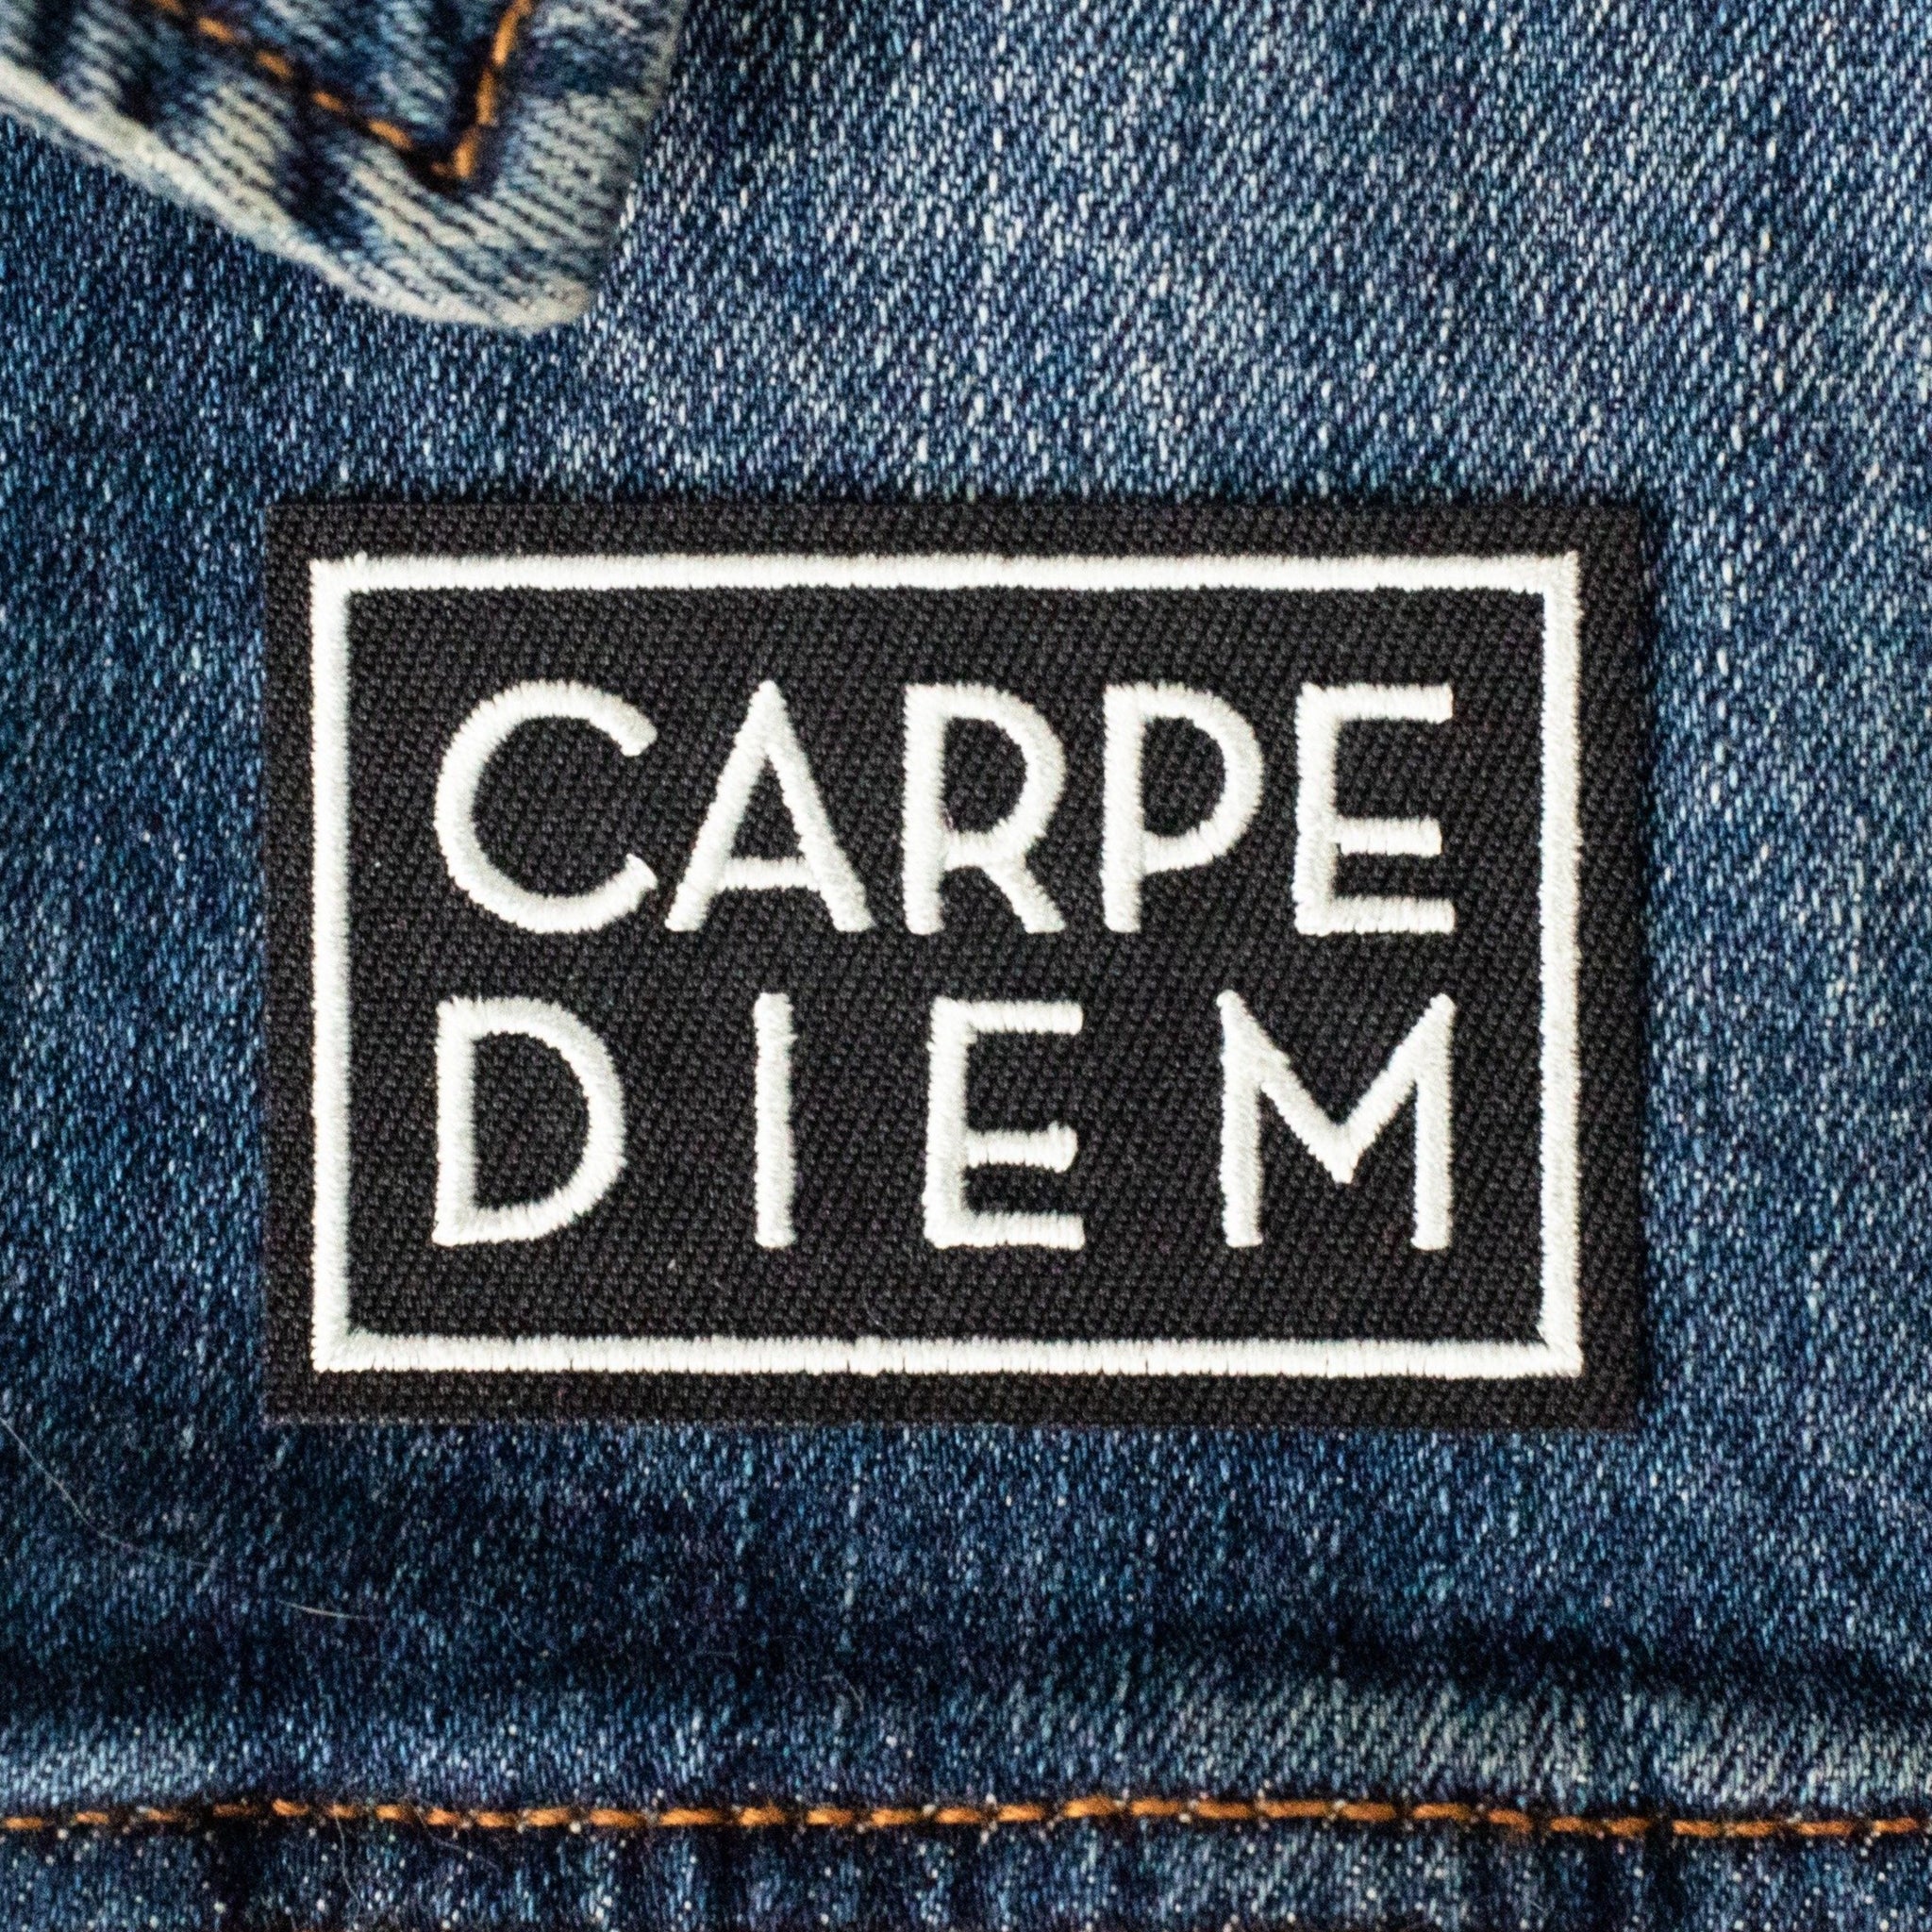 Carpe Diem embroidered iron on or sew on patch. Latin for seize the day this patch will motivate and inspire you. 